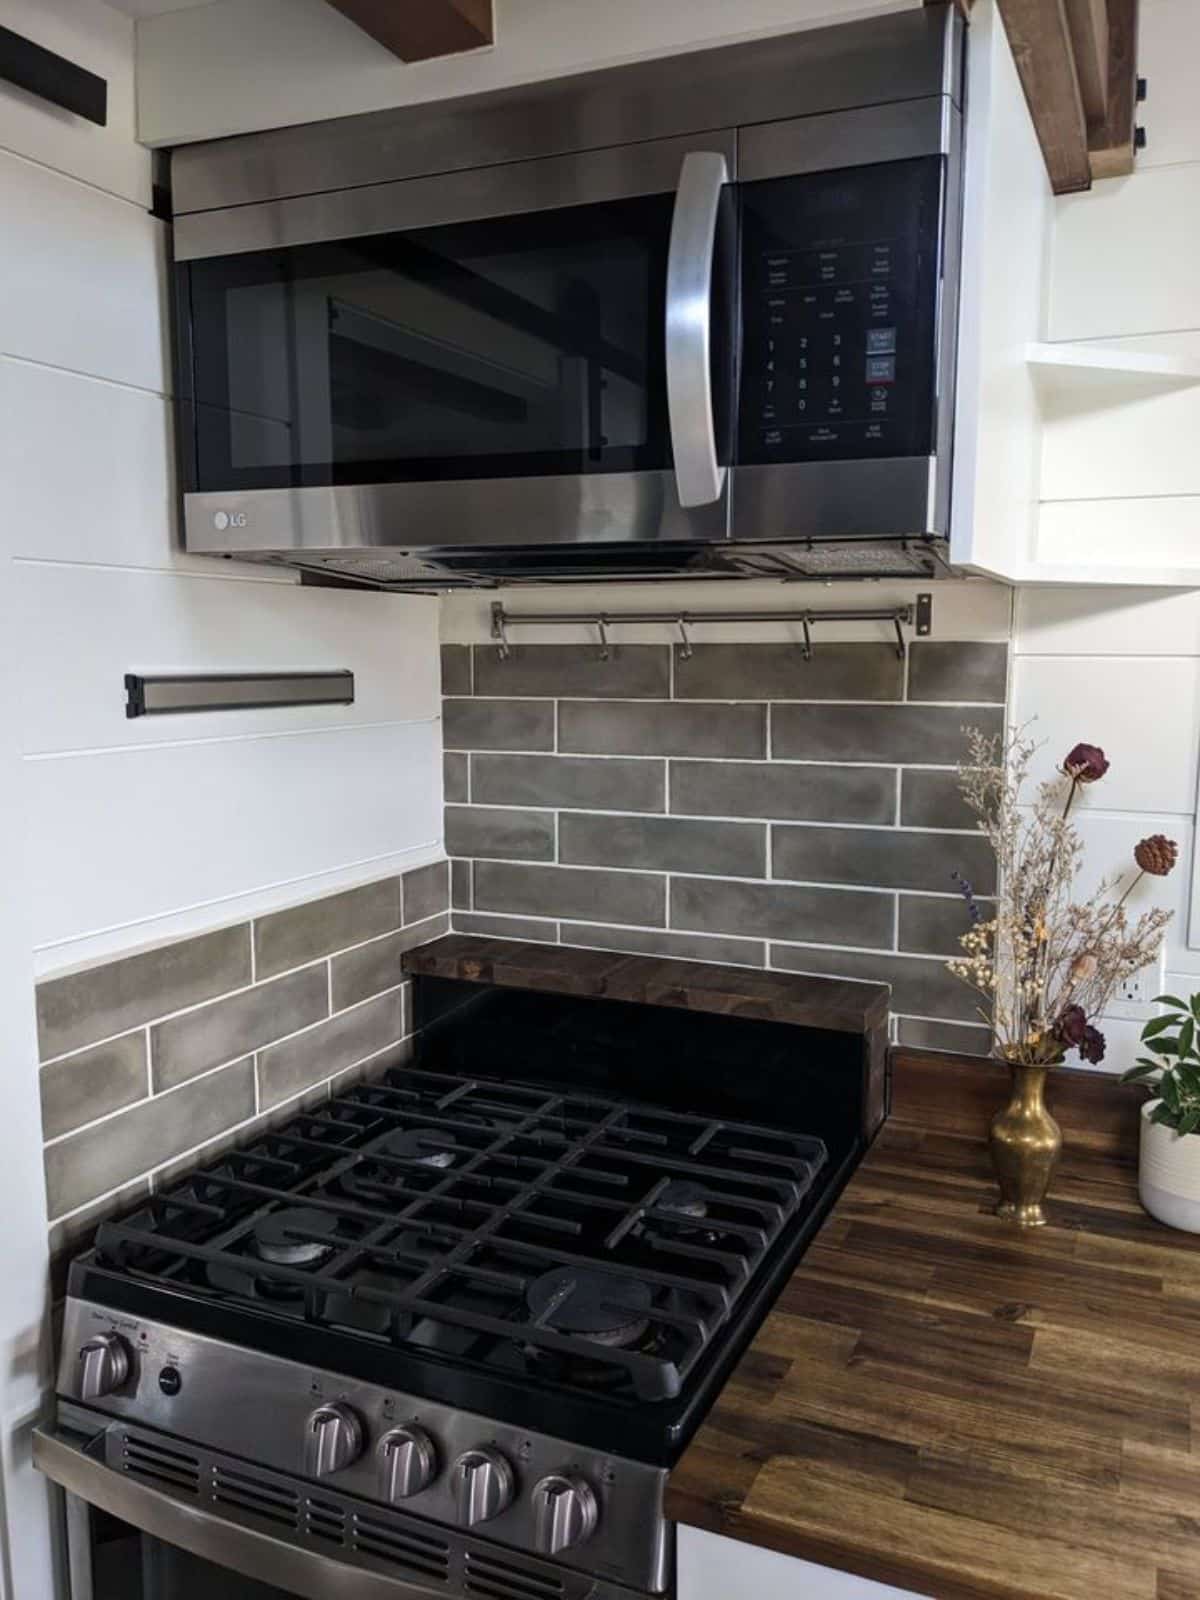 propane stove and oven, dishwasher present in the kitchen area